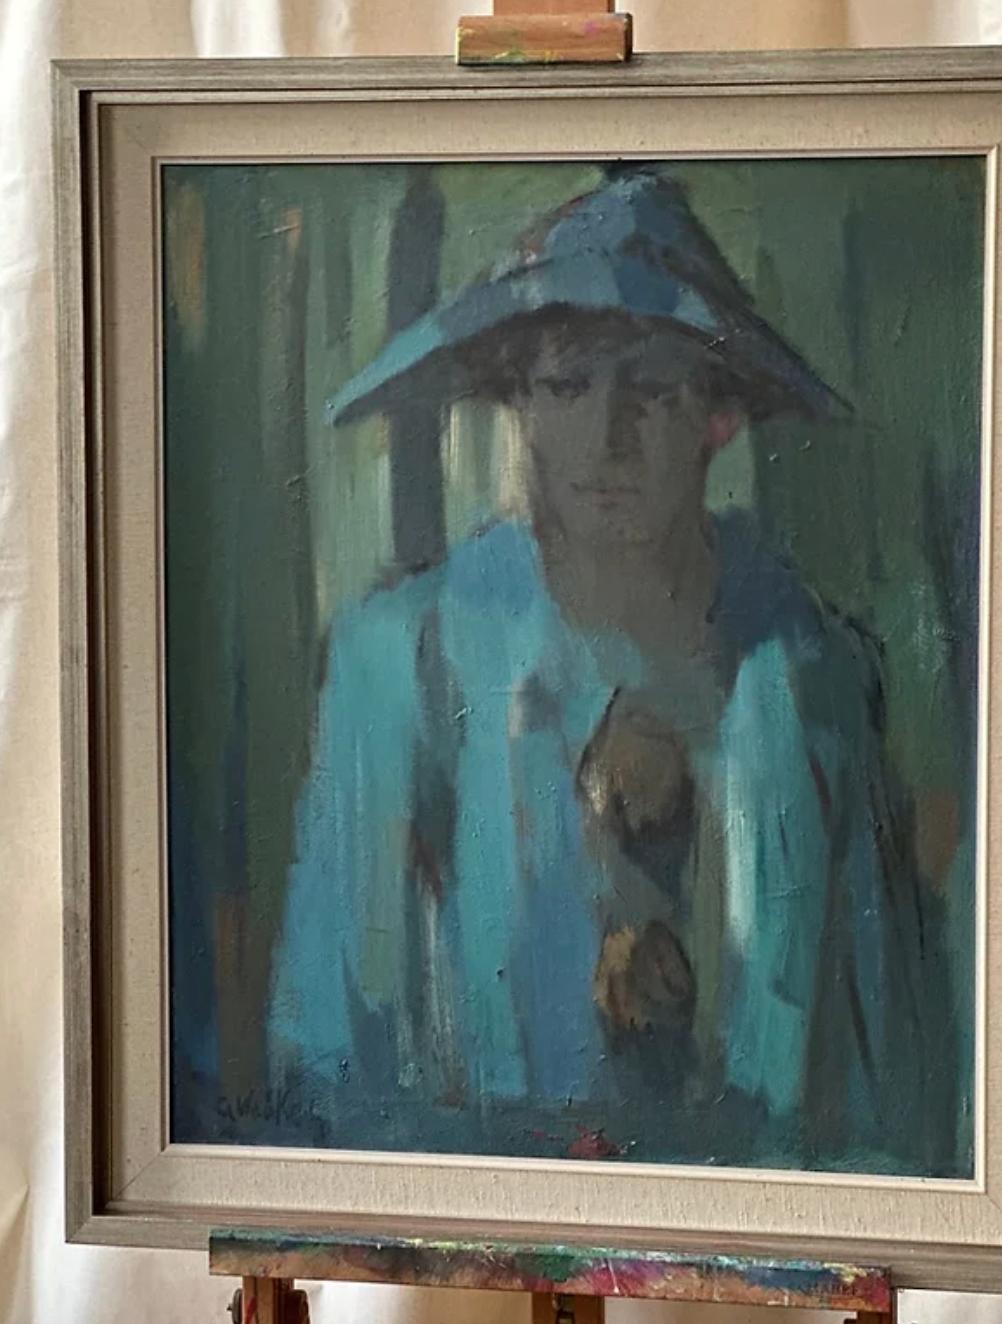 Framed Harlequin, Oil Painting By Gertrud Wrake-Lindqvist., Signed. In Good Condition In London, England